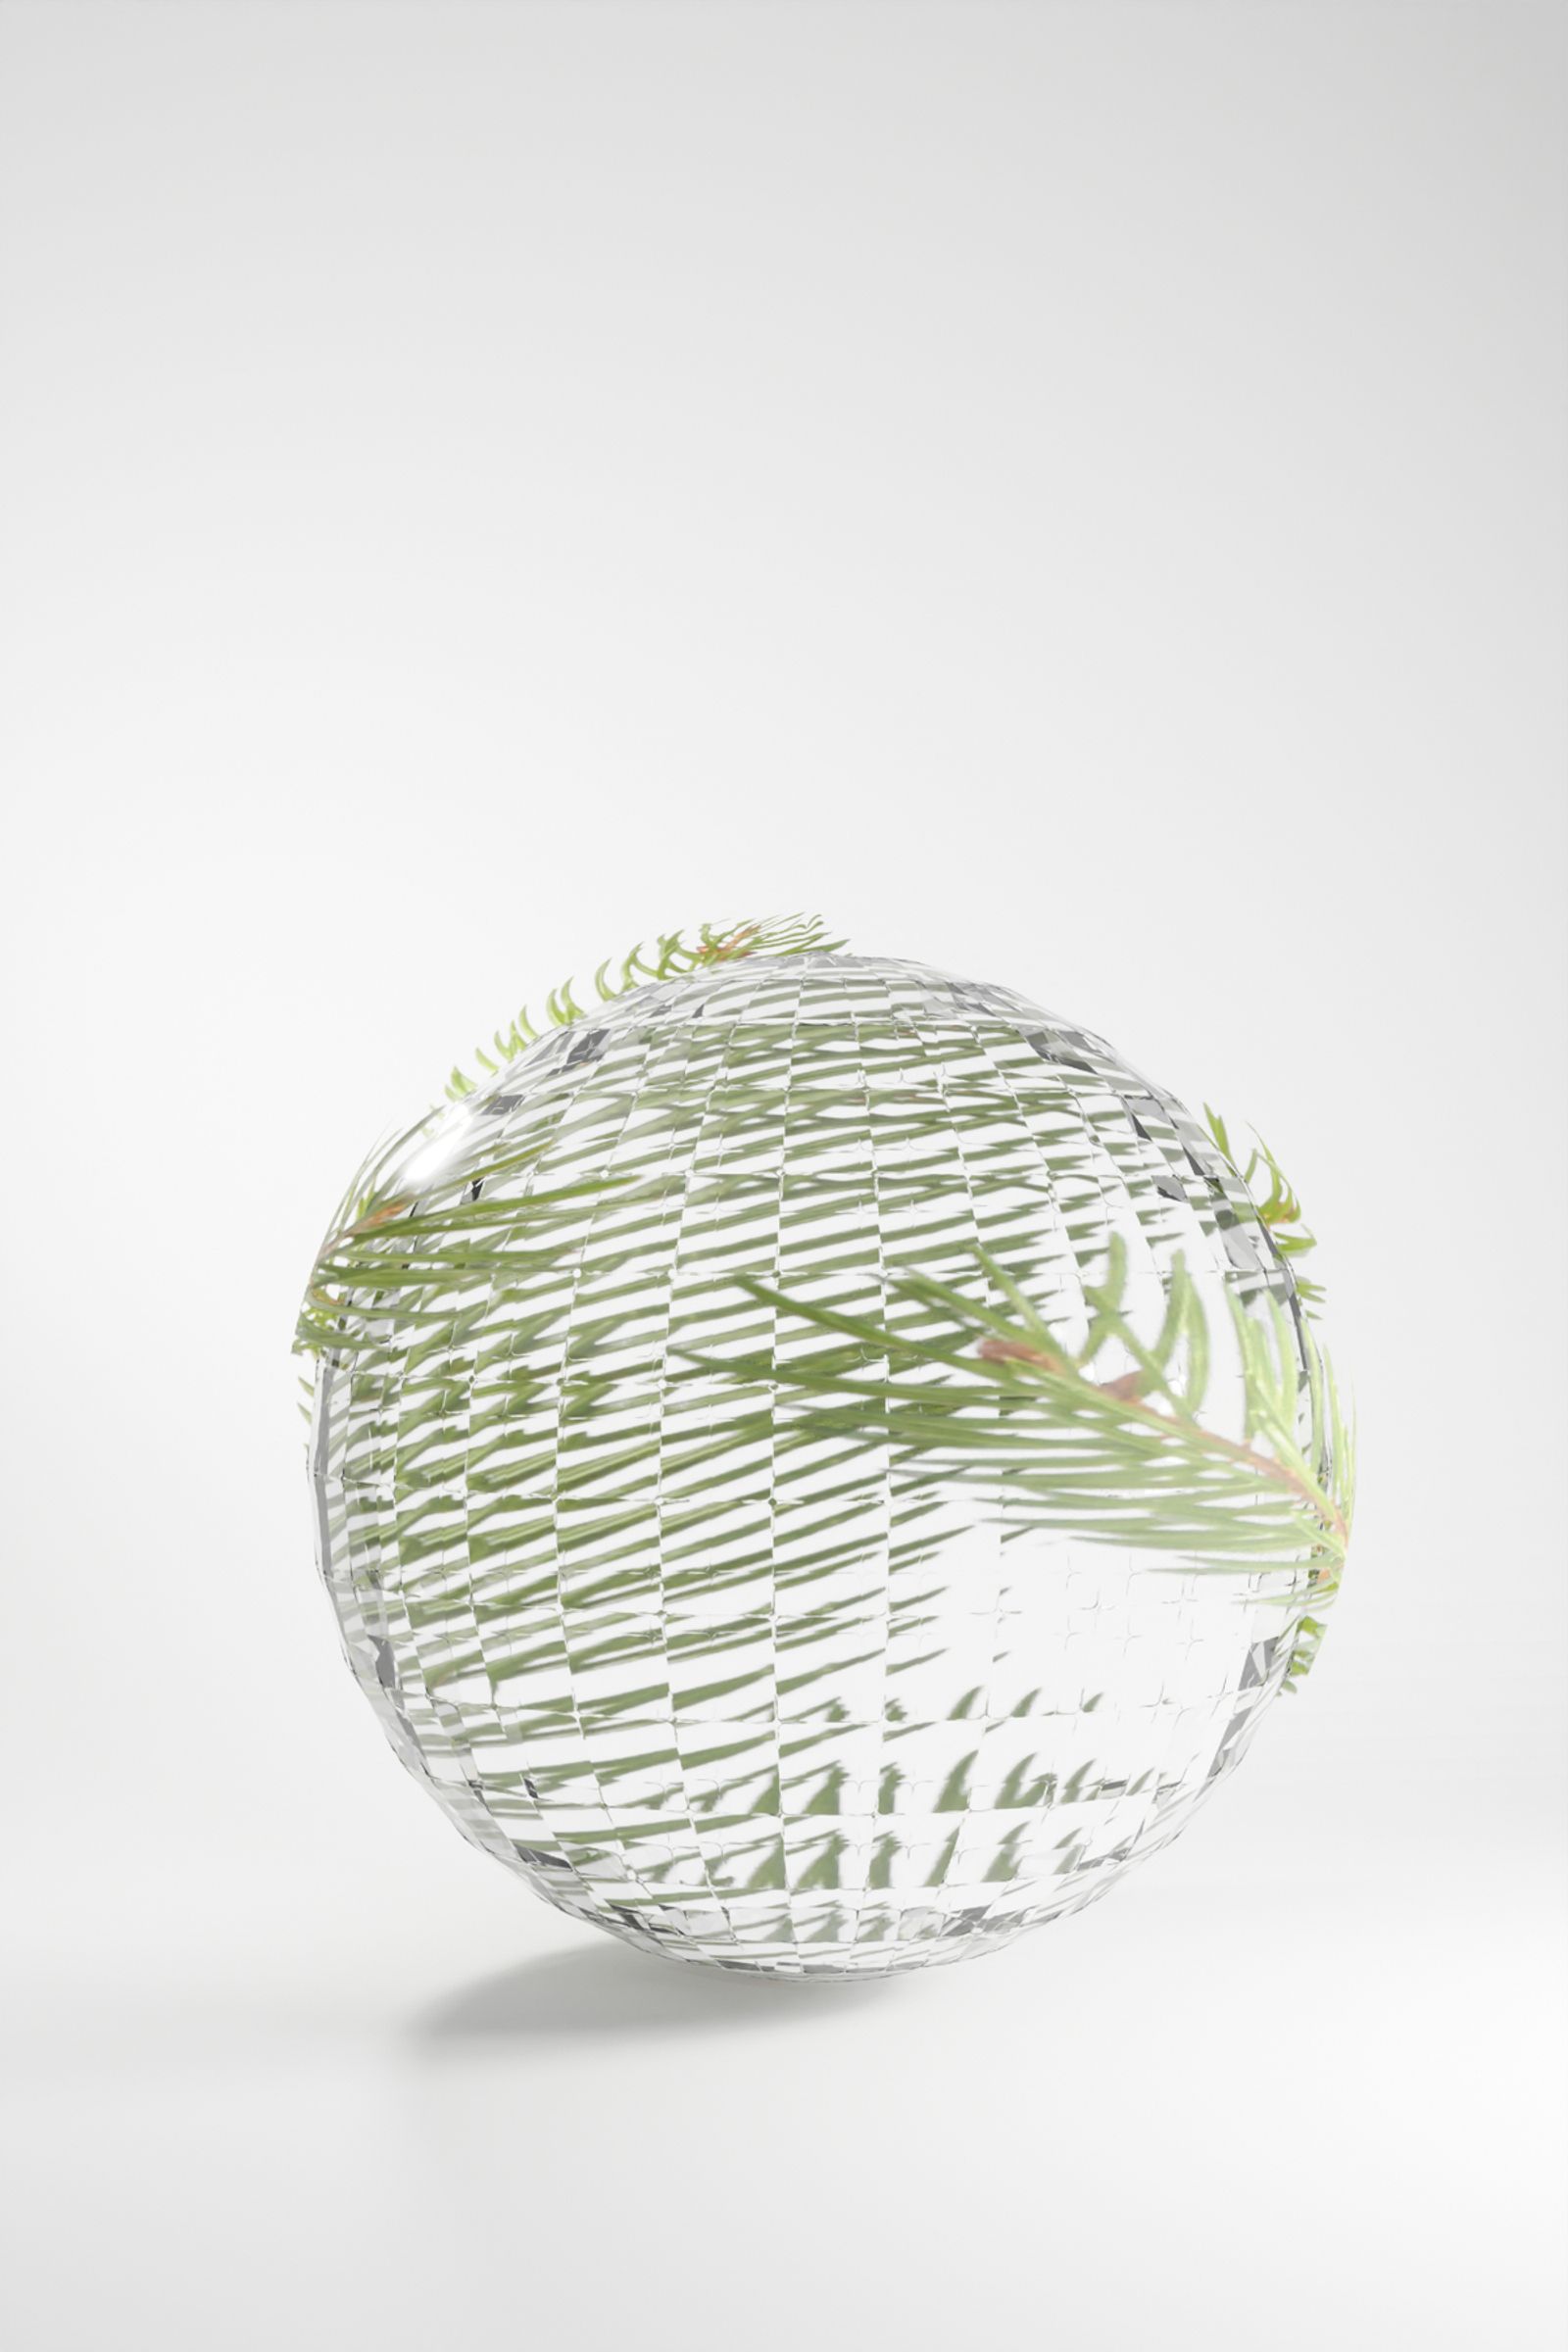 © Sheung Yiu - digital art of a twig wrapping around a glass sphere